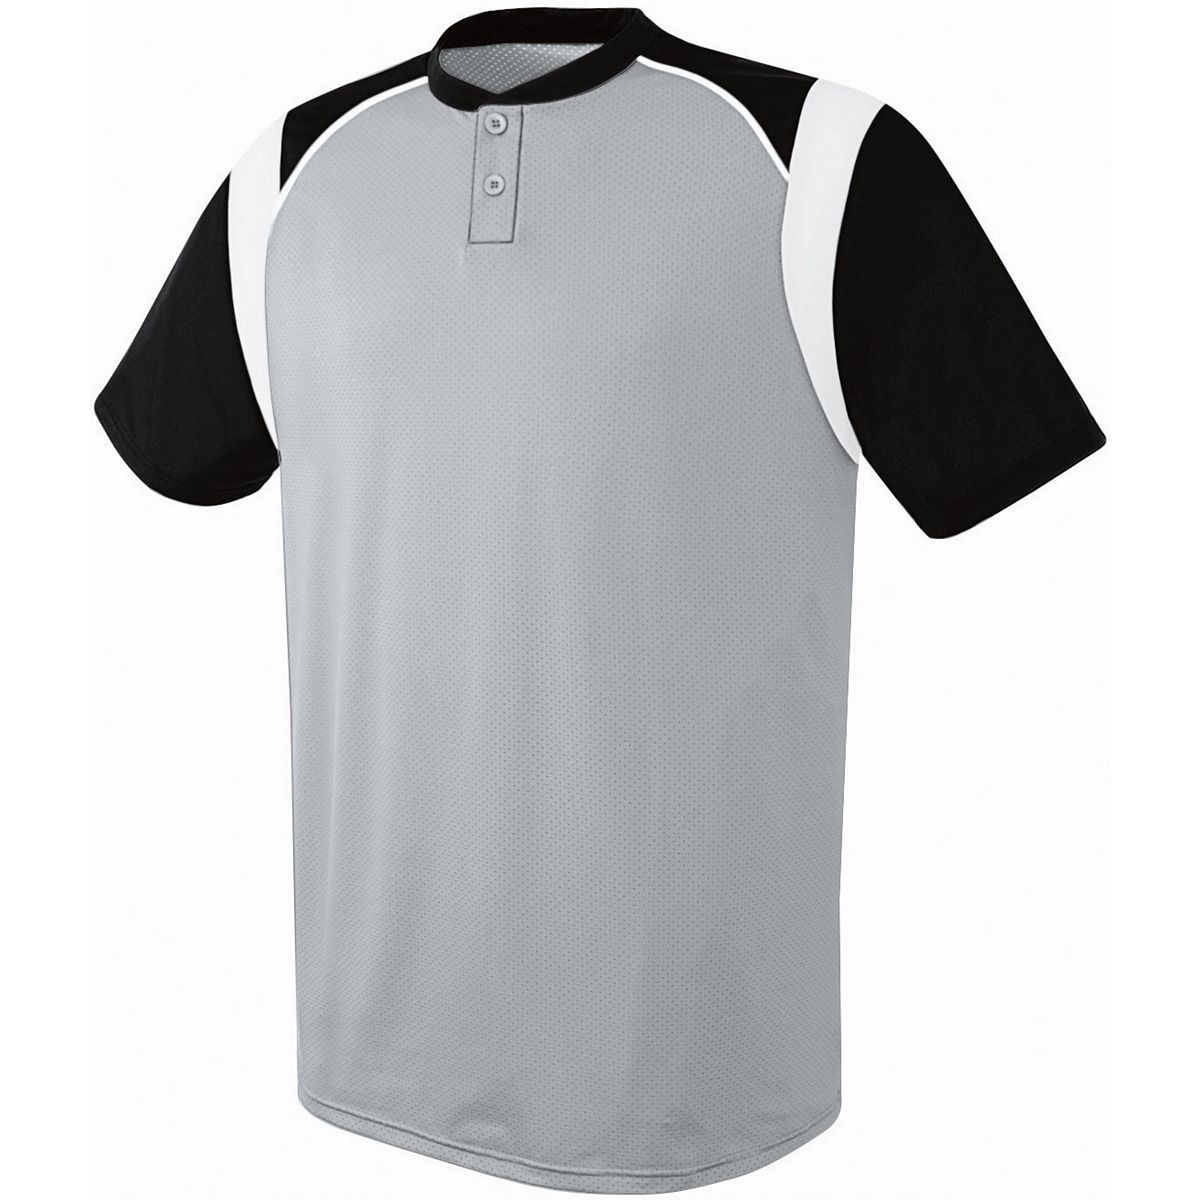 Augusta Sportswear Youth Wildcard Two-Button Jersey in Silver Grey/Black/White  -Part of the Youth, Youth-Jersey, Augusta-Products, Baseball, Shirts, All-Sports, All-Sports-1 product lines at KanaleyCreations.com